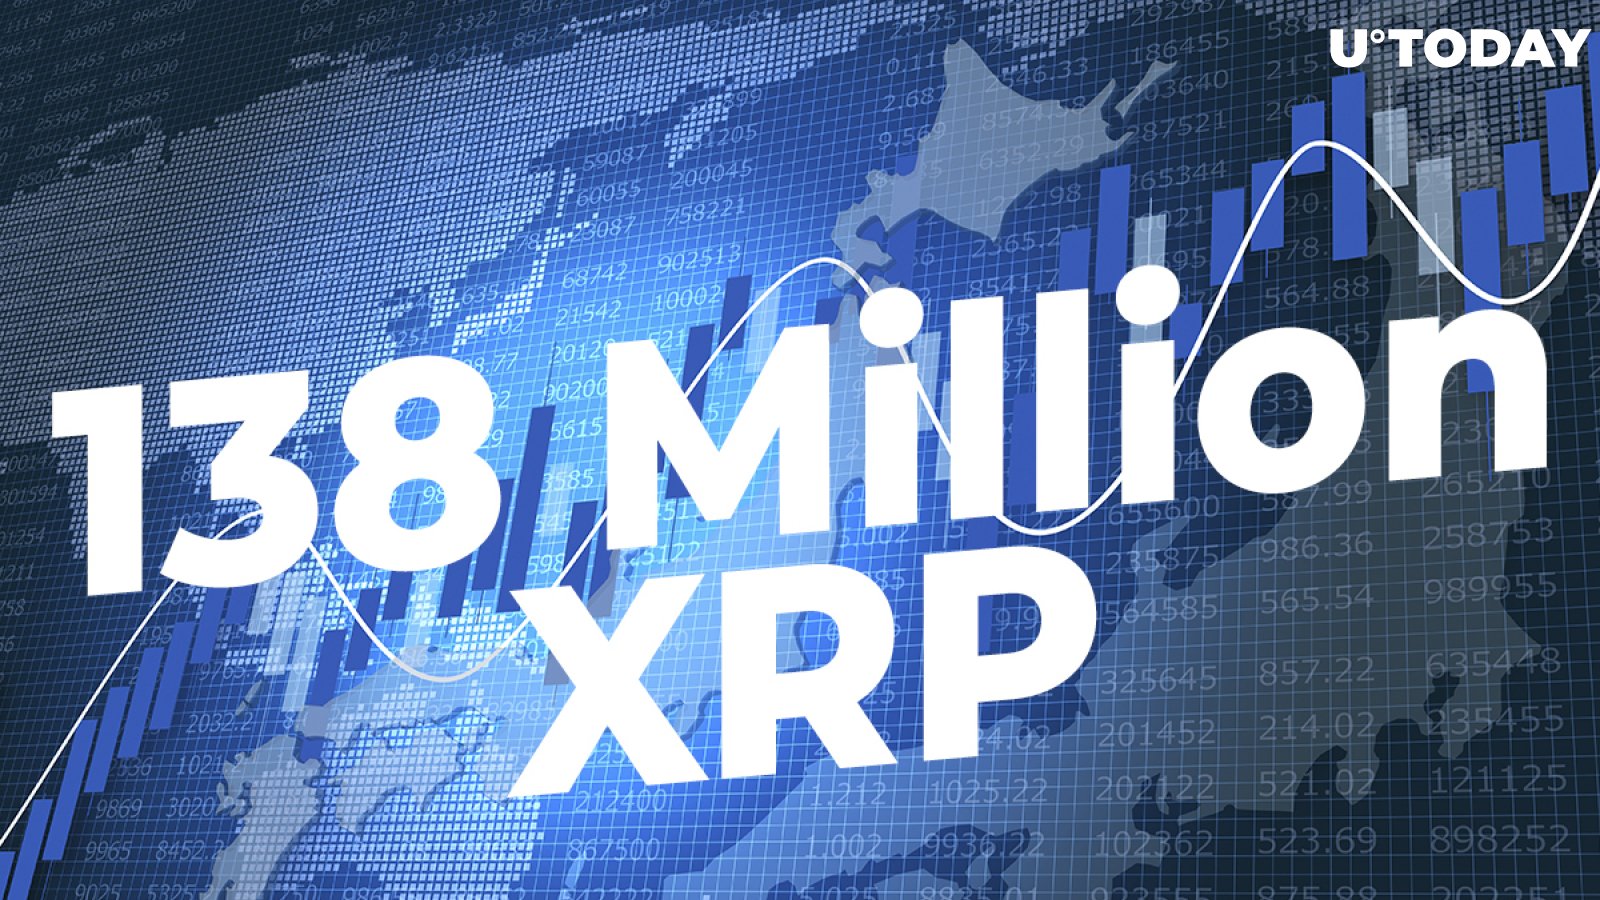 138 Million XRP Shifted by Ripple and Top-Tier Global Exchanges